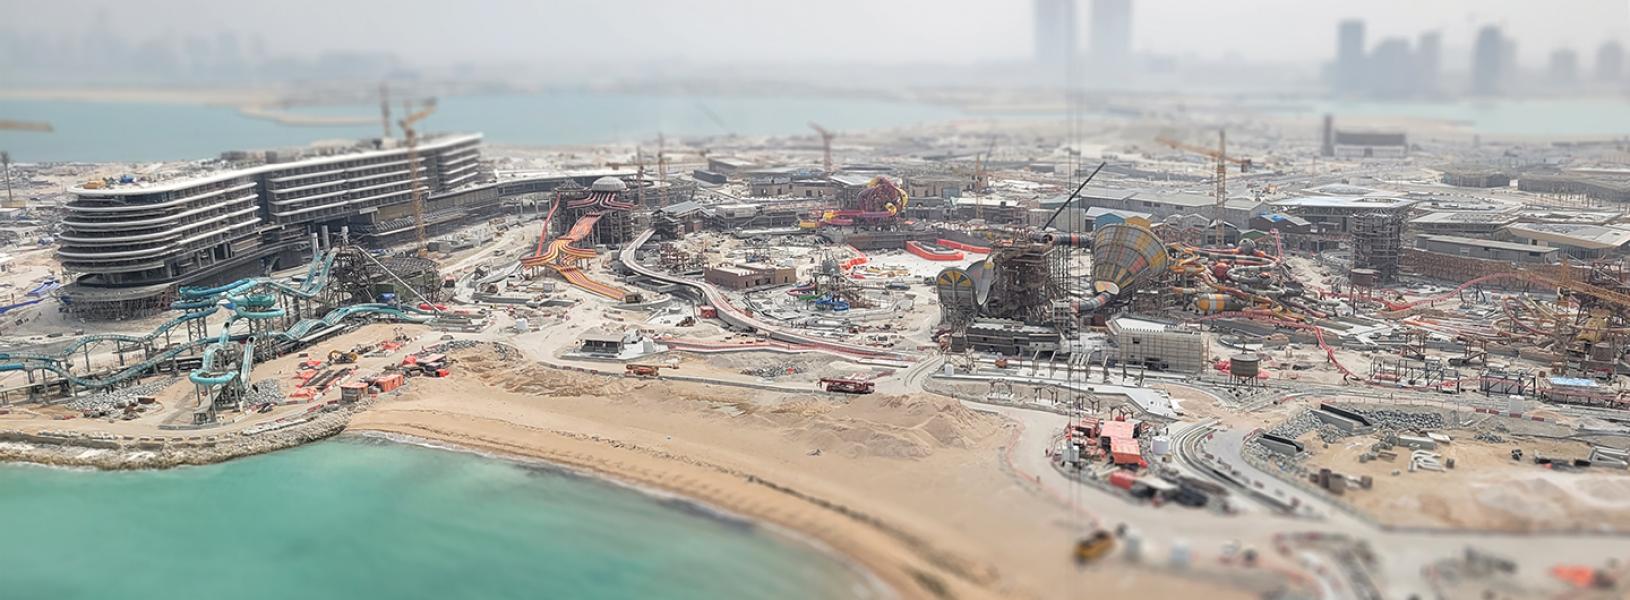 A panoramic view of the waterslide park being constructed in Qatar